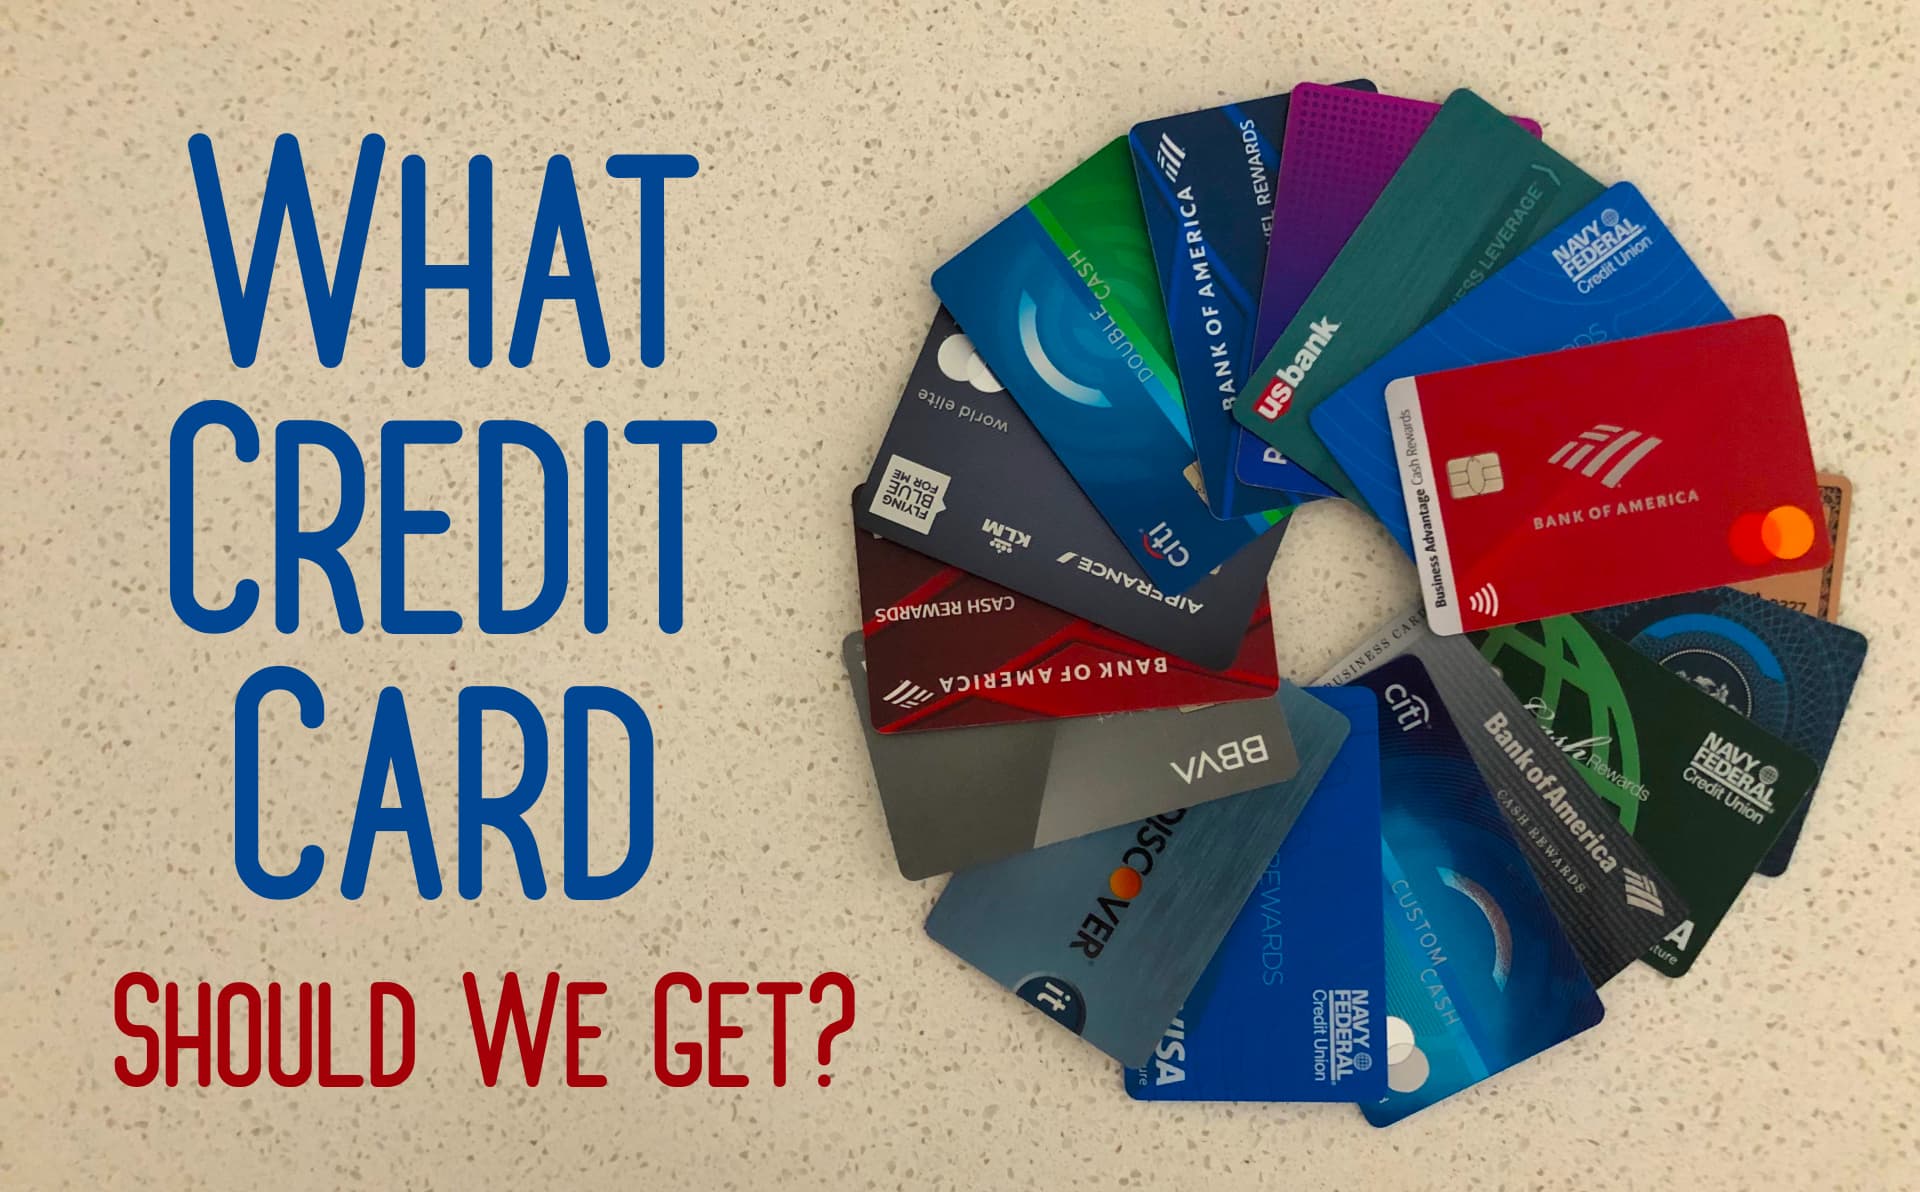 You are currently viewing Which Credit Card Should We Get?